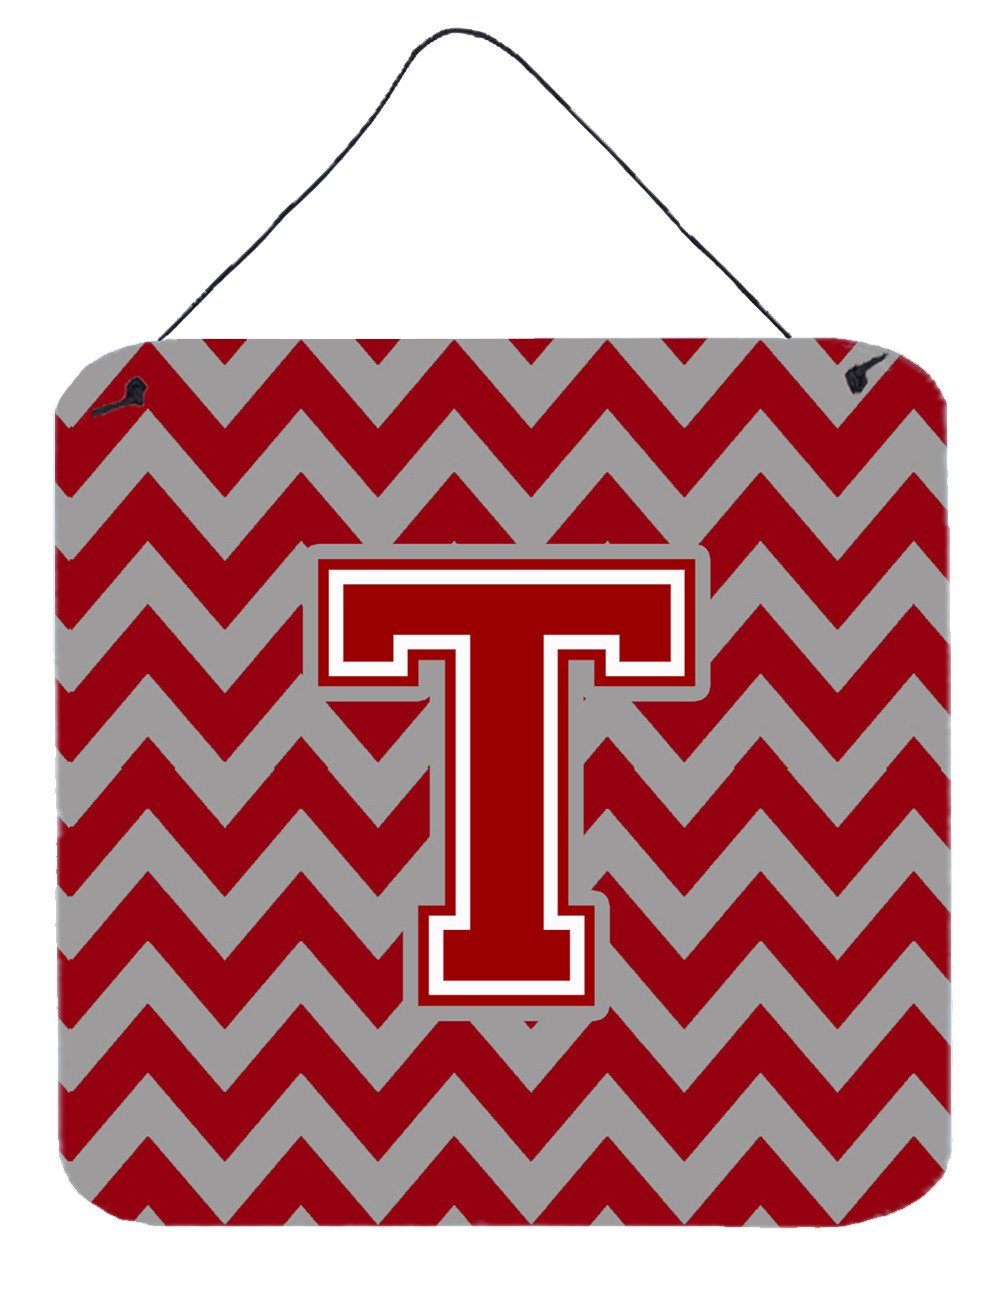 Letter T Chevron Maroon and White Wall or Door Hanging Prints CJ1049-TDS66 by Caroline's Treasures